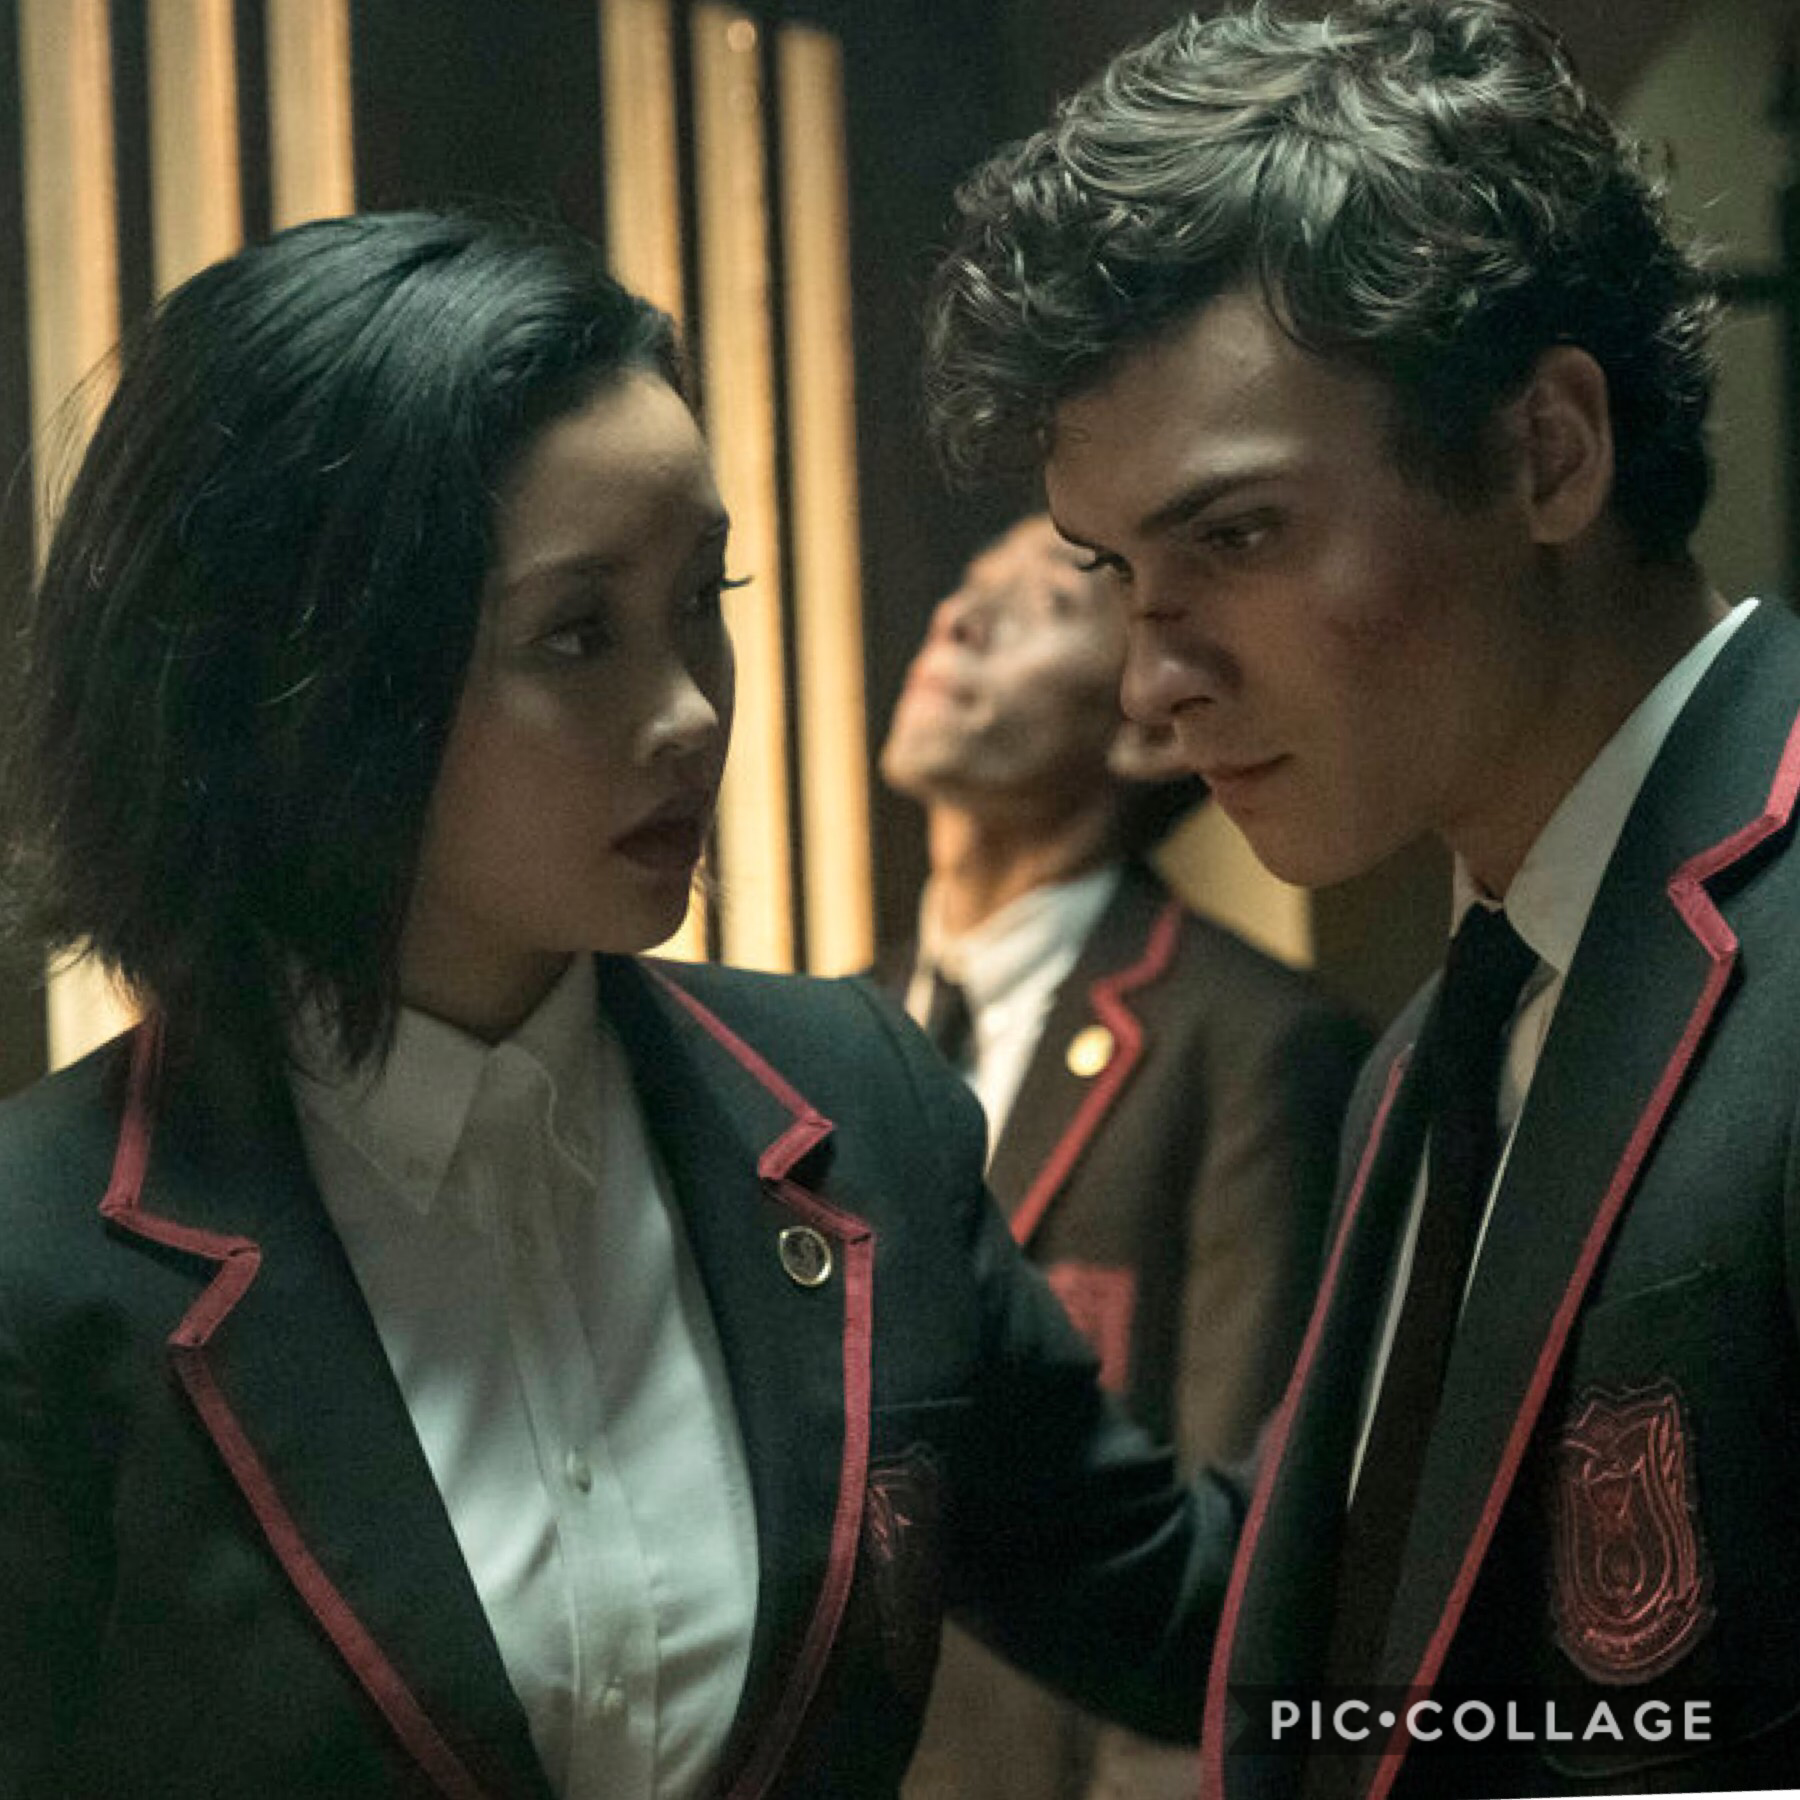 why T F WAS DEADLY CLASS CANCELLED 😐😐😐 i just started watching it and i already love it but it was cancelled after its first season YHIS YEAR AR EU JOKIgNnn!!!!!!!😐